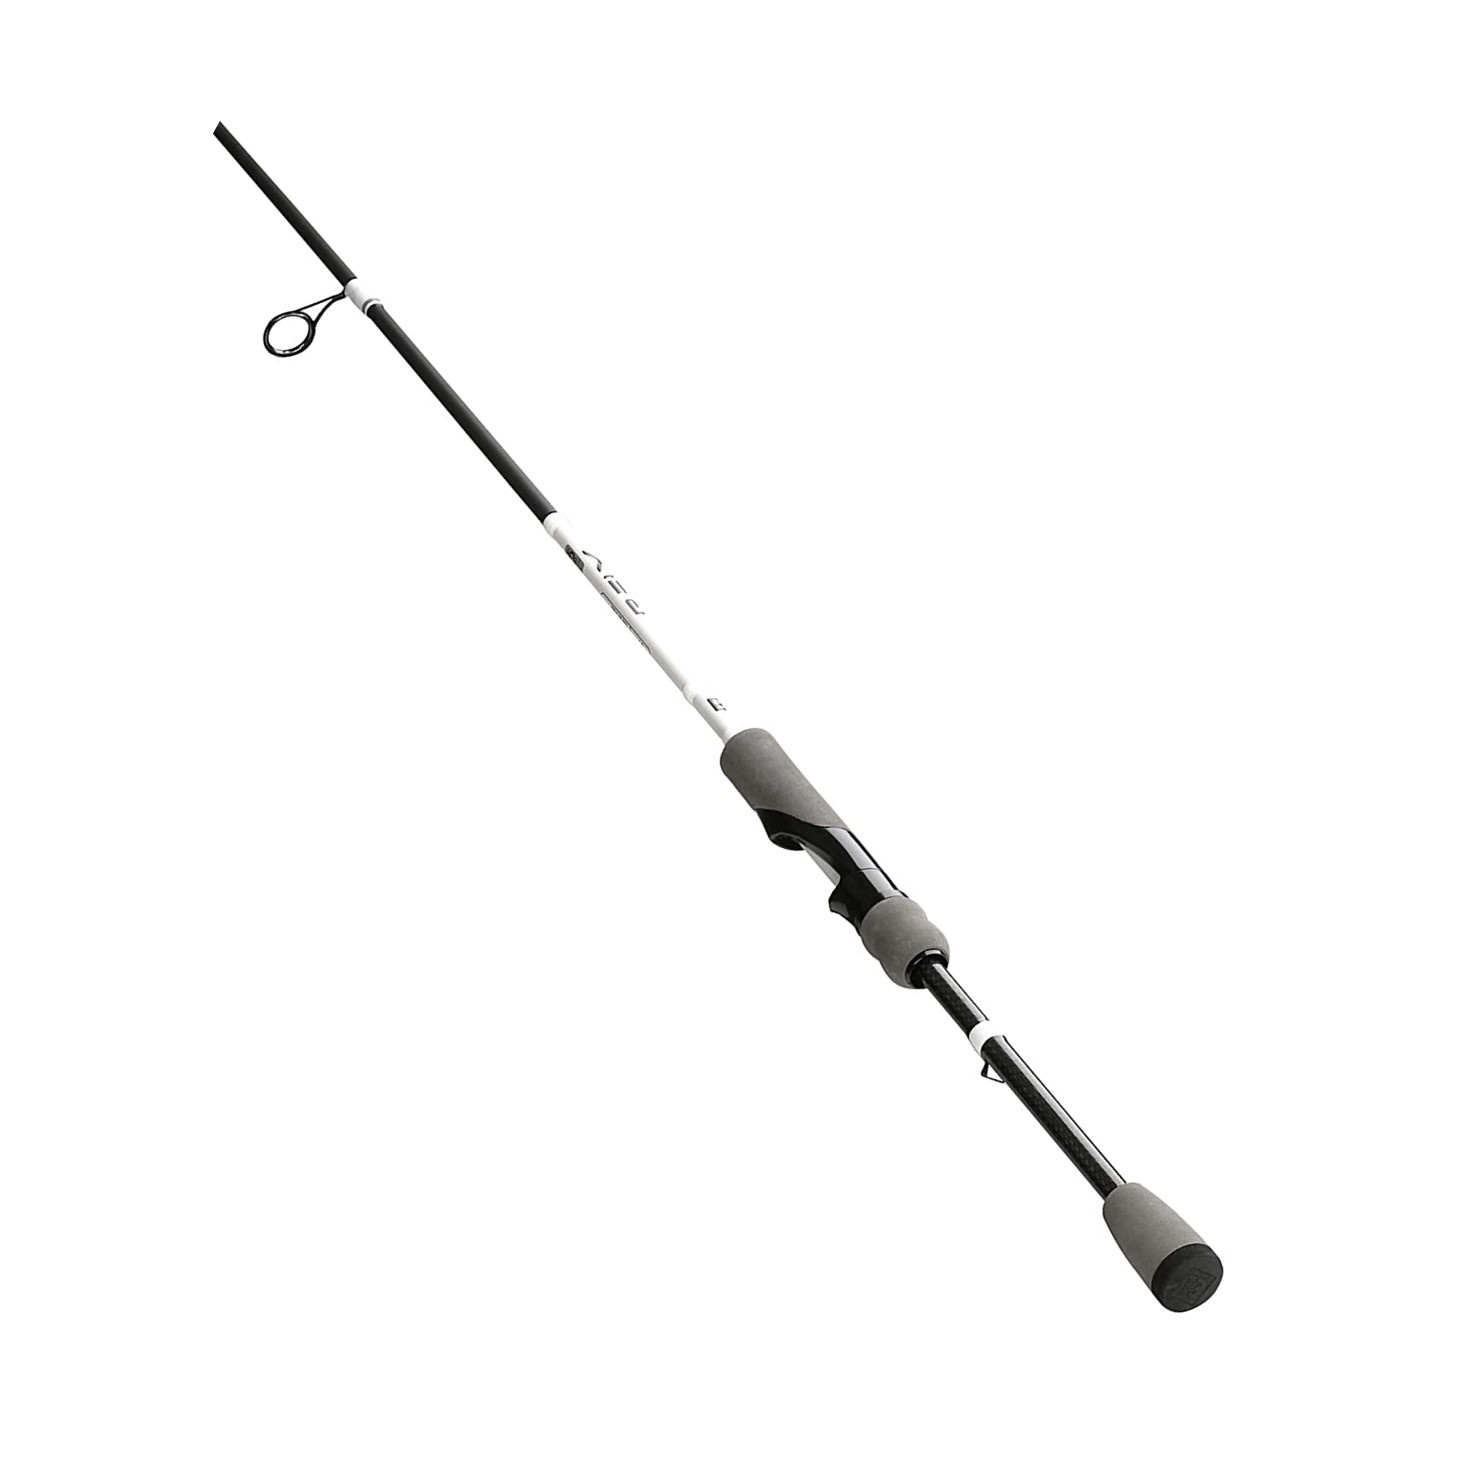 Rely Black 6'7 M Spinning Rod , 2PC.